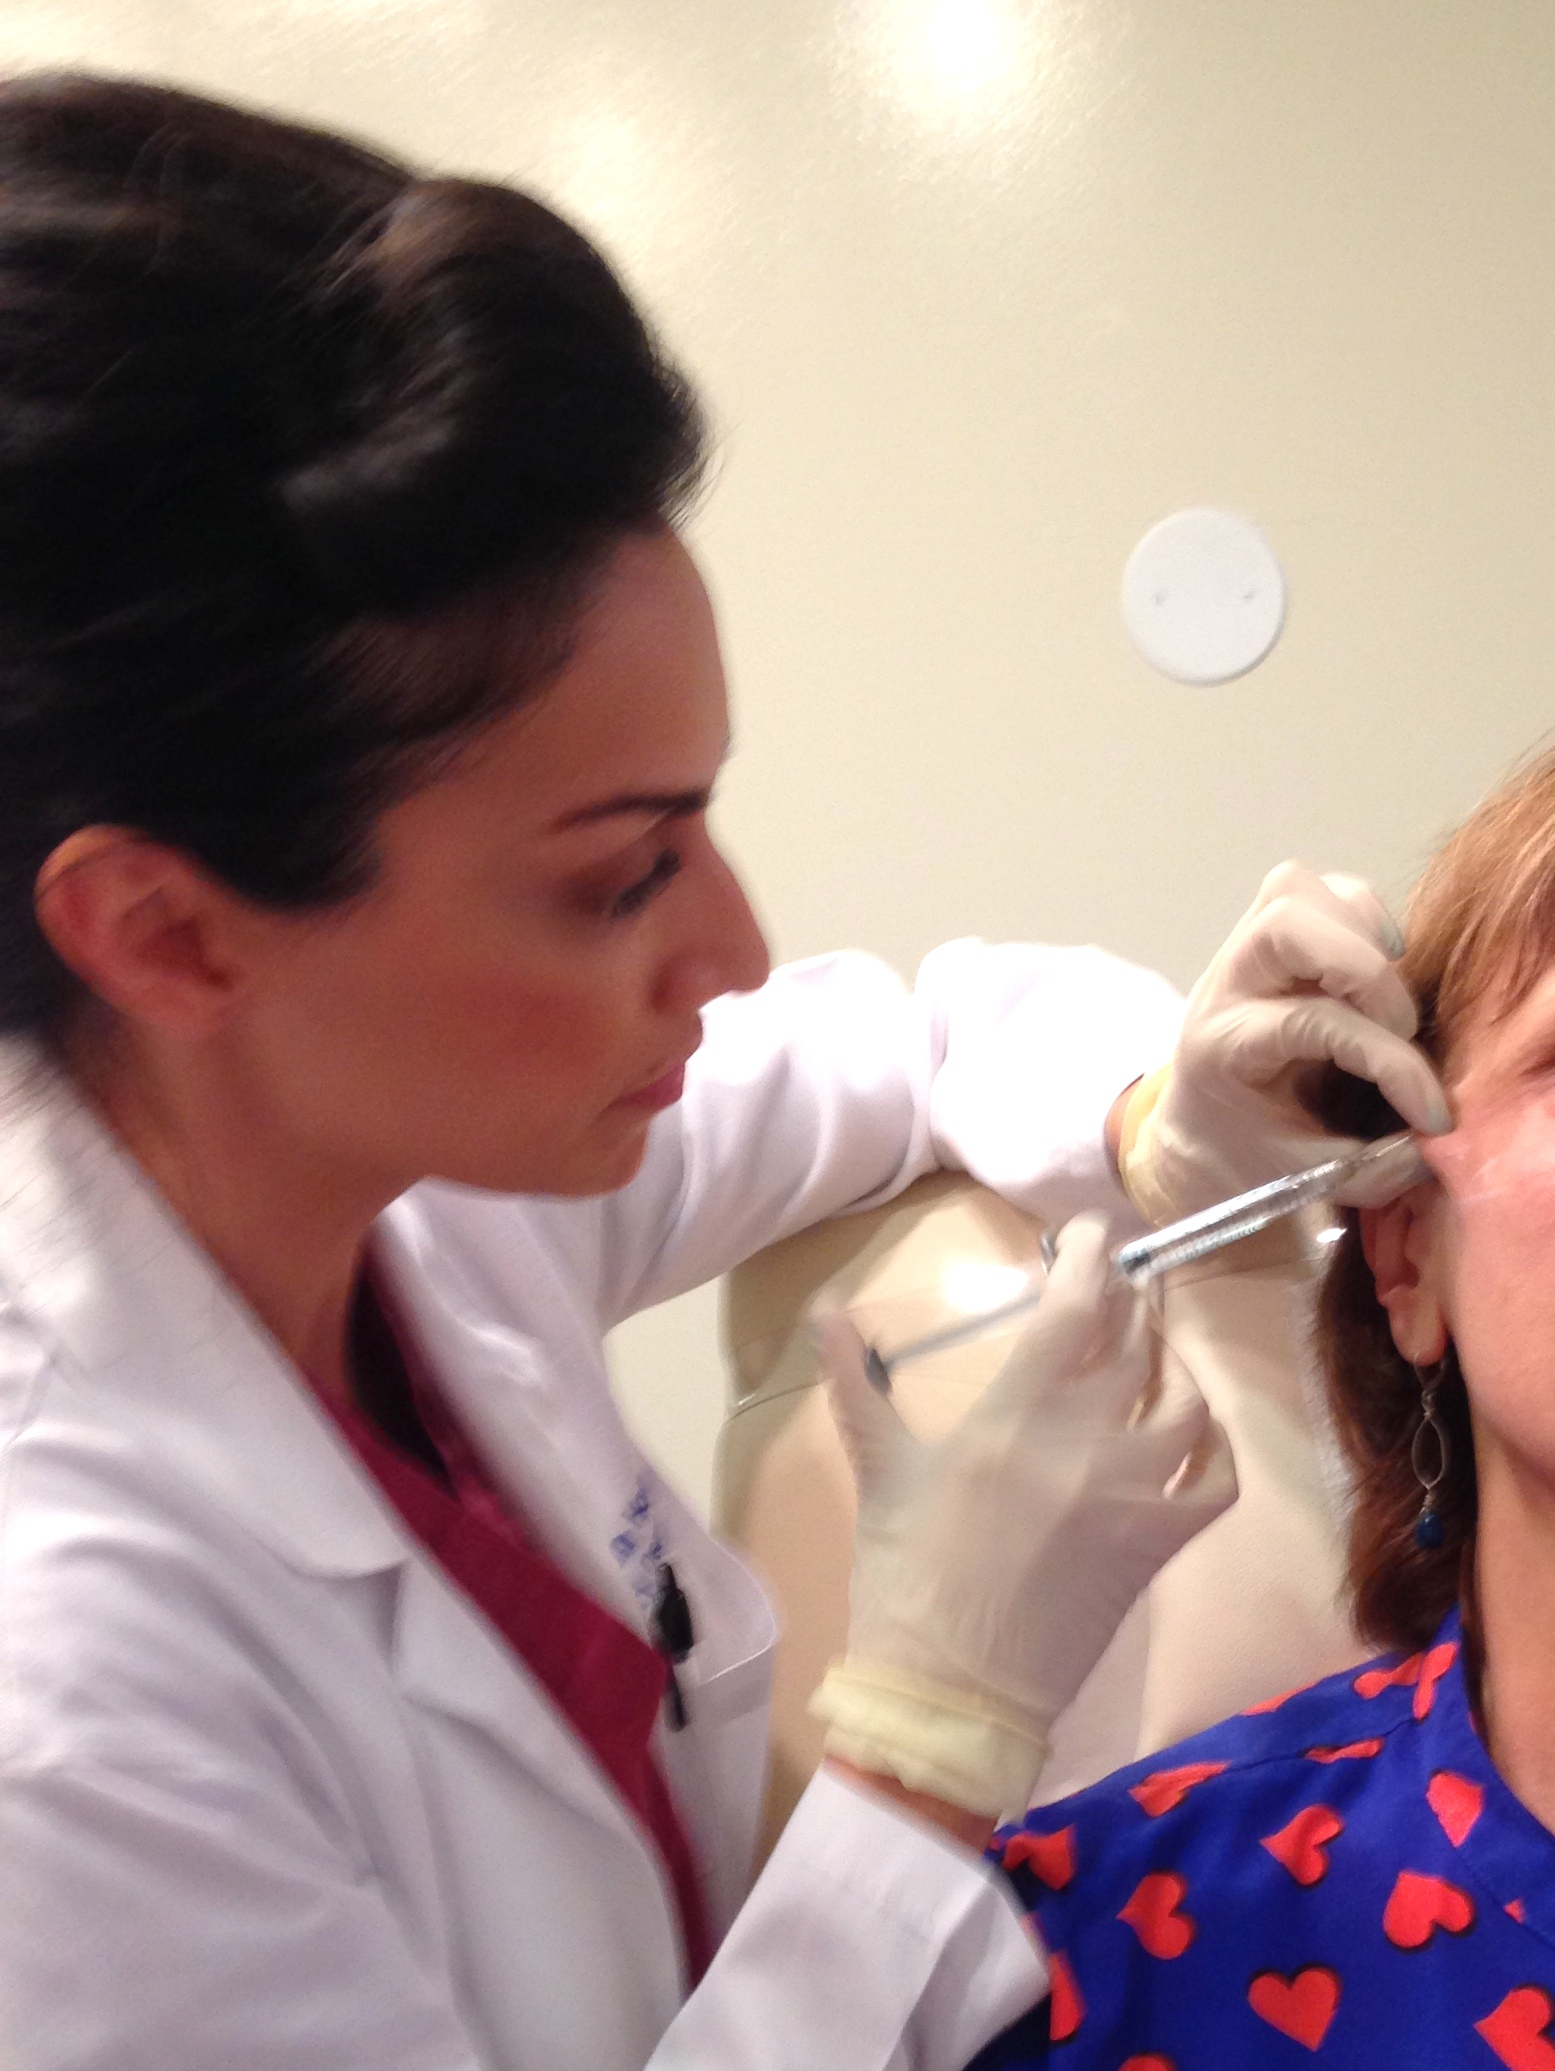 beverly hills dermatology consultants beverly hills dermatology consultants...